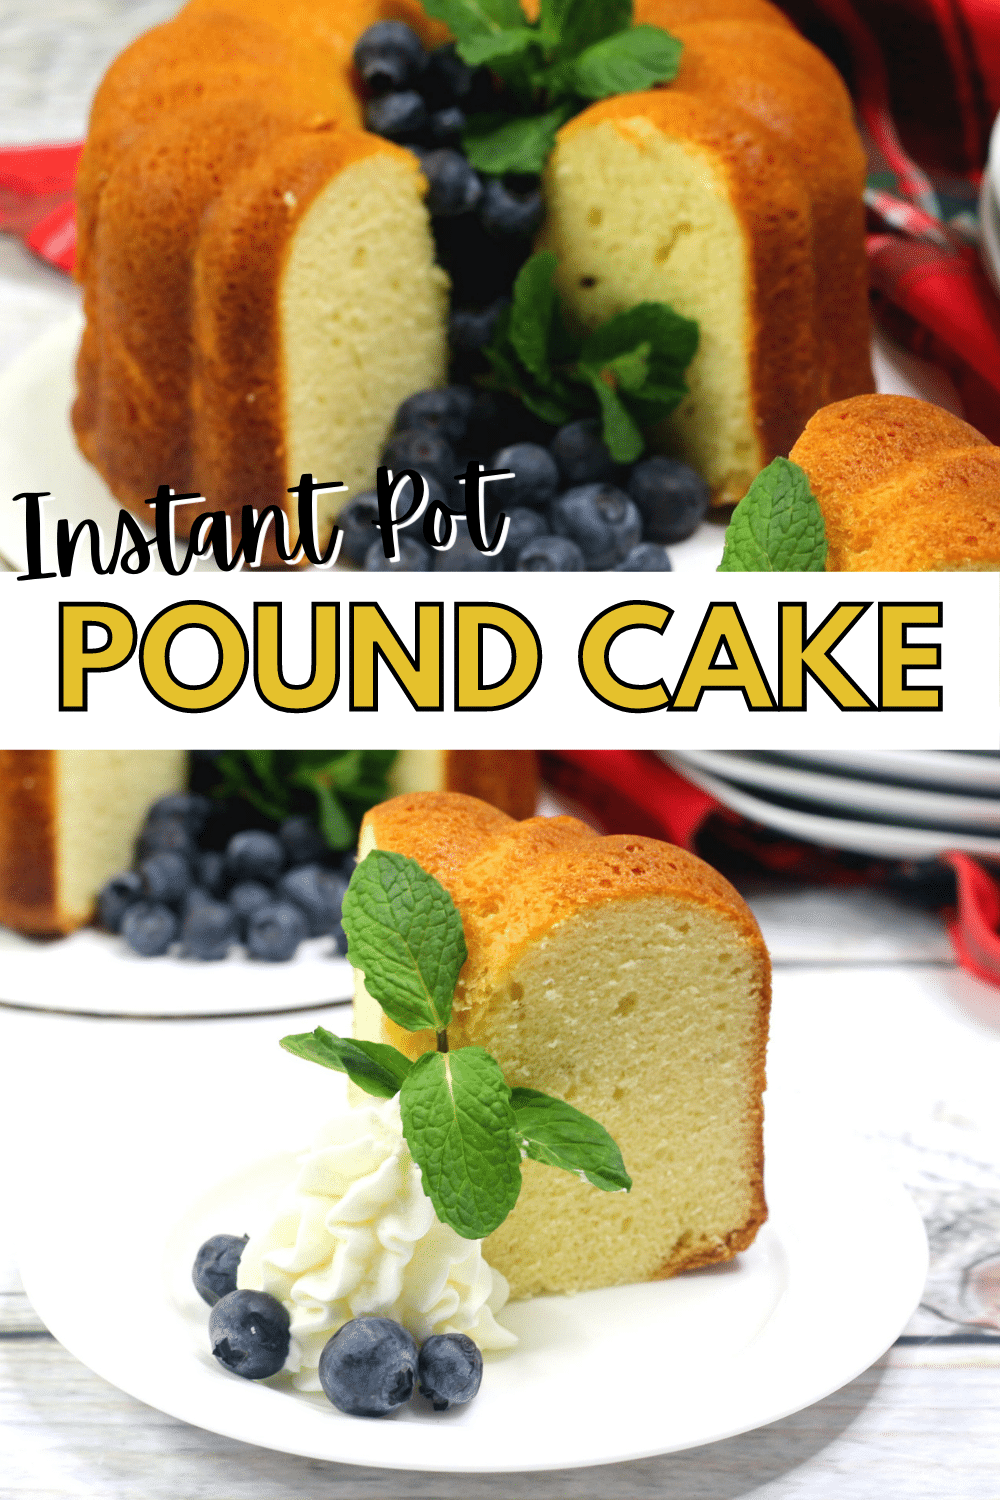 Instant Pot Pound Cake is one of the best pound cakes you will ever have. It is moist, dense, full of flavor, and perfect for any occasion. #instantpot #pressurecooker #poundcake #dessert #recipe via @wondermomwannab